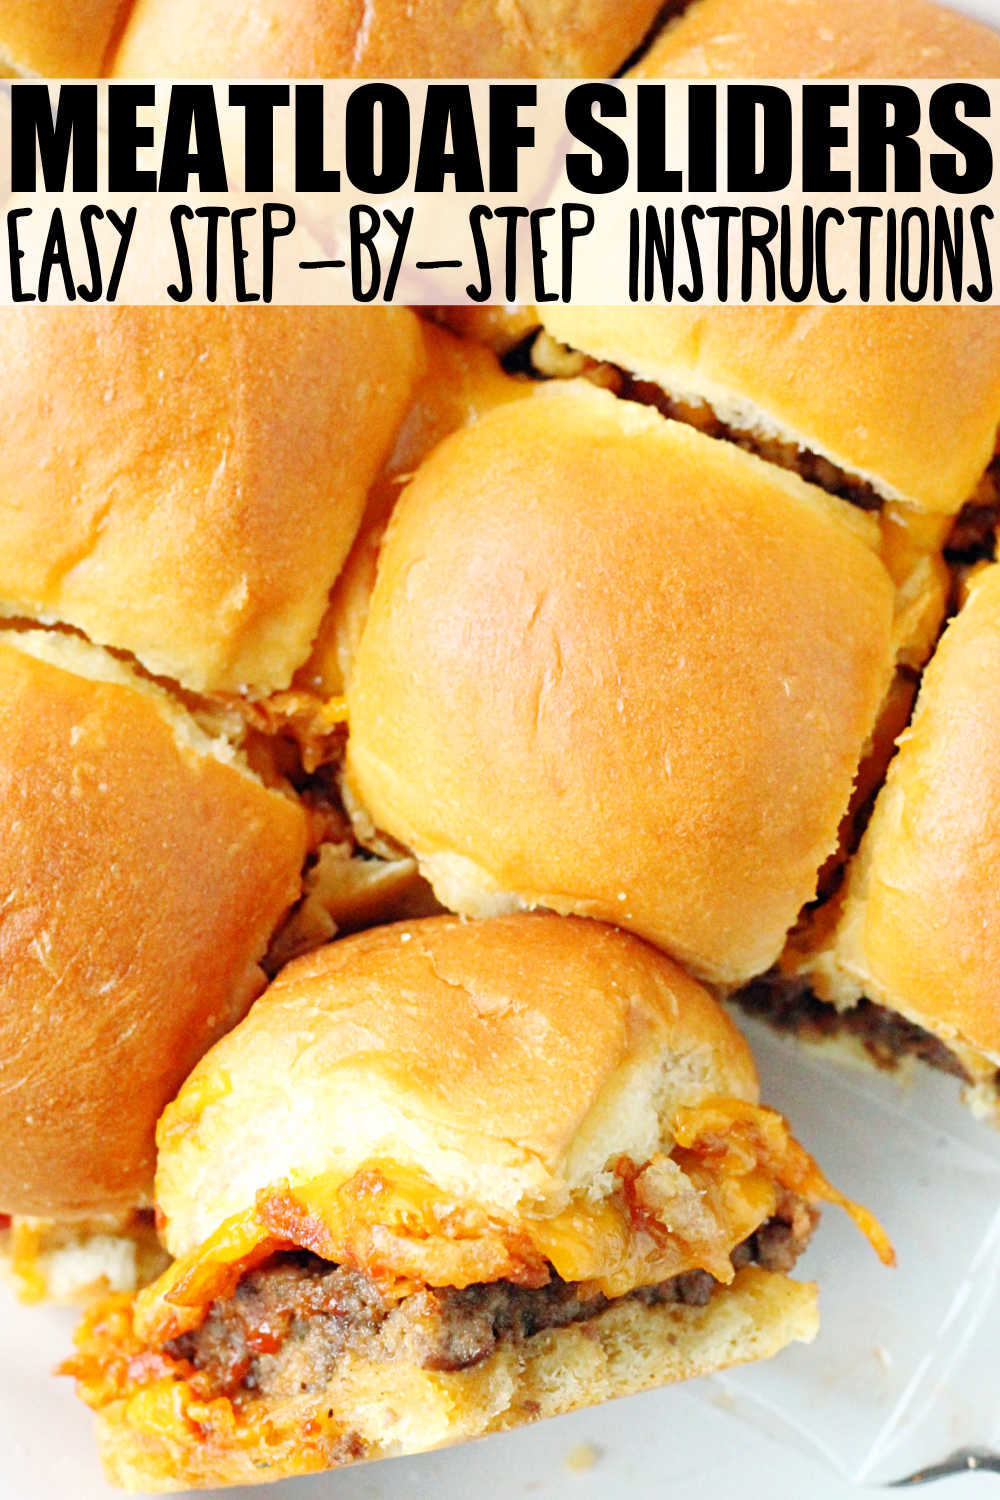 Serve these meatloaf sliders at your next party and everyone will be asking you for the recipe. Made with a unique way of baking the meatloaf seasoned burger and topped with french fried onions, cheddar and a sweet and tangy sauce. via @foodtasticmom